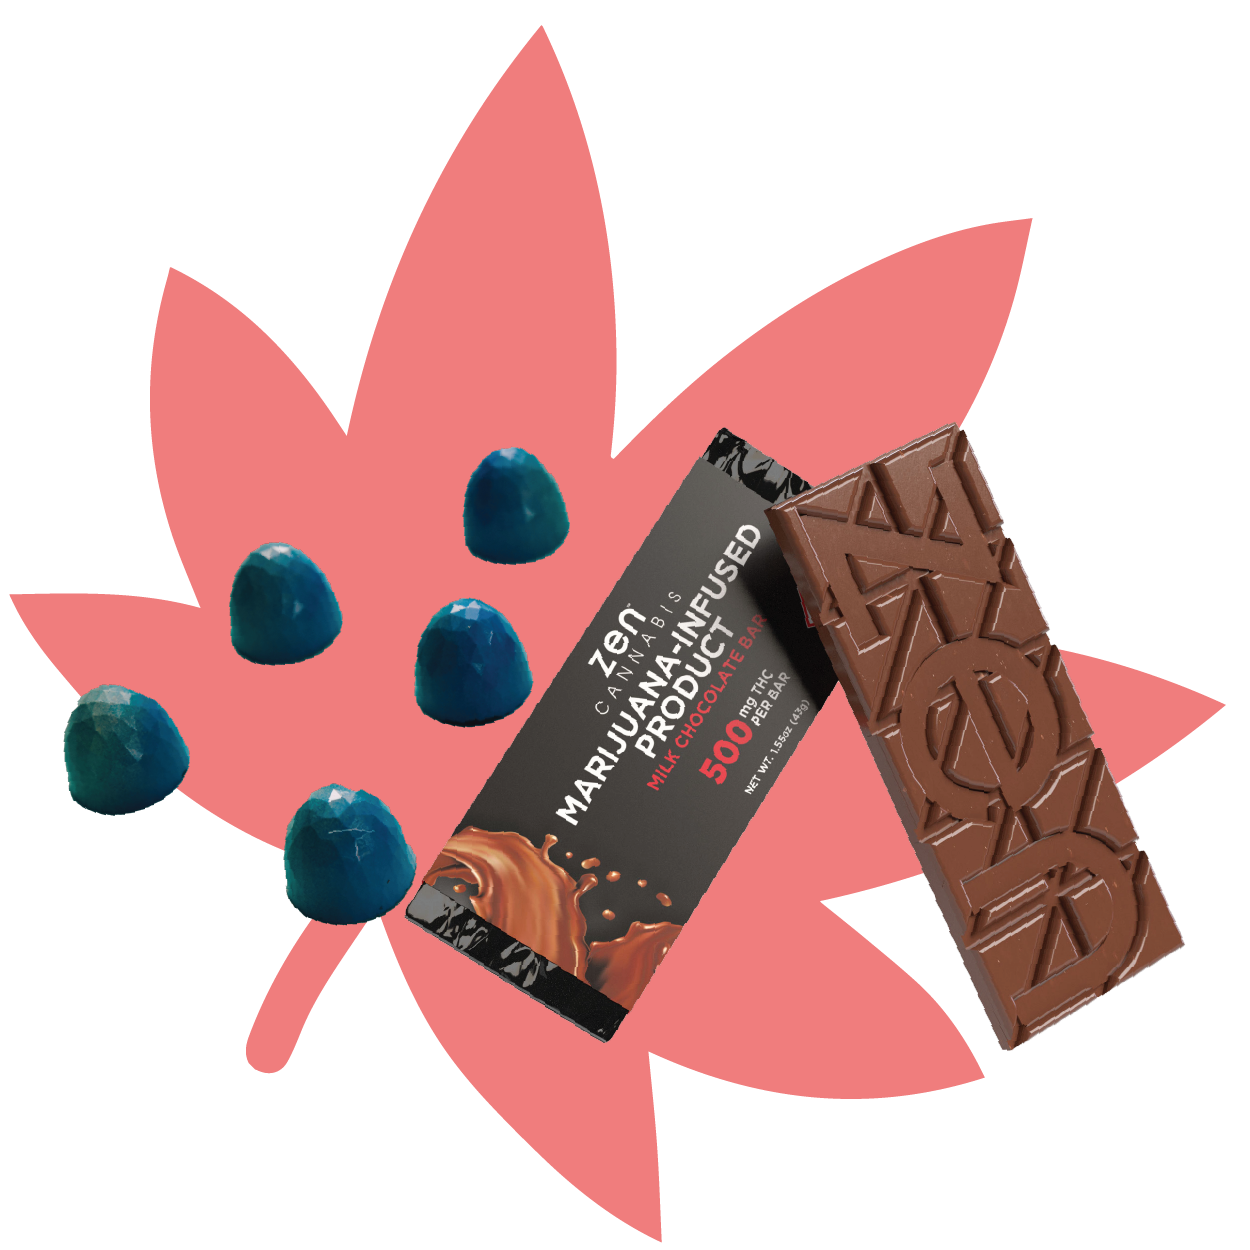 Clovr bonbons and Zen chocolate bar superimposed on a pink cannabis leaf graphic